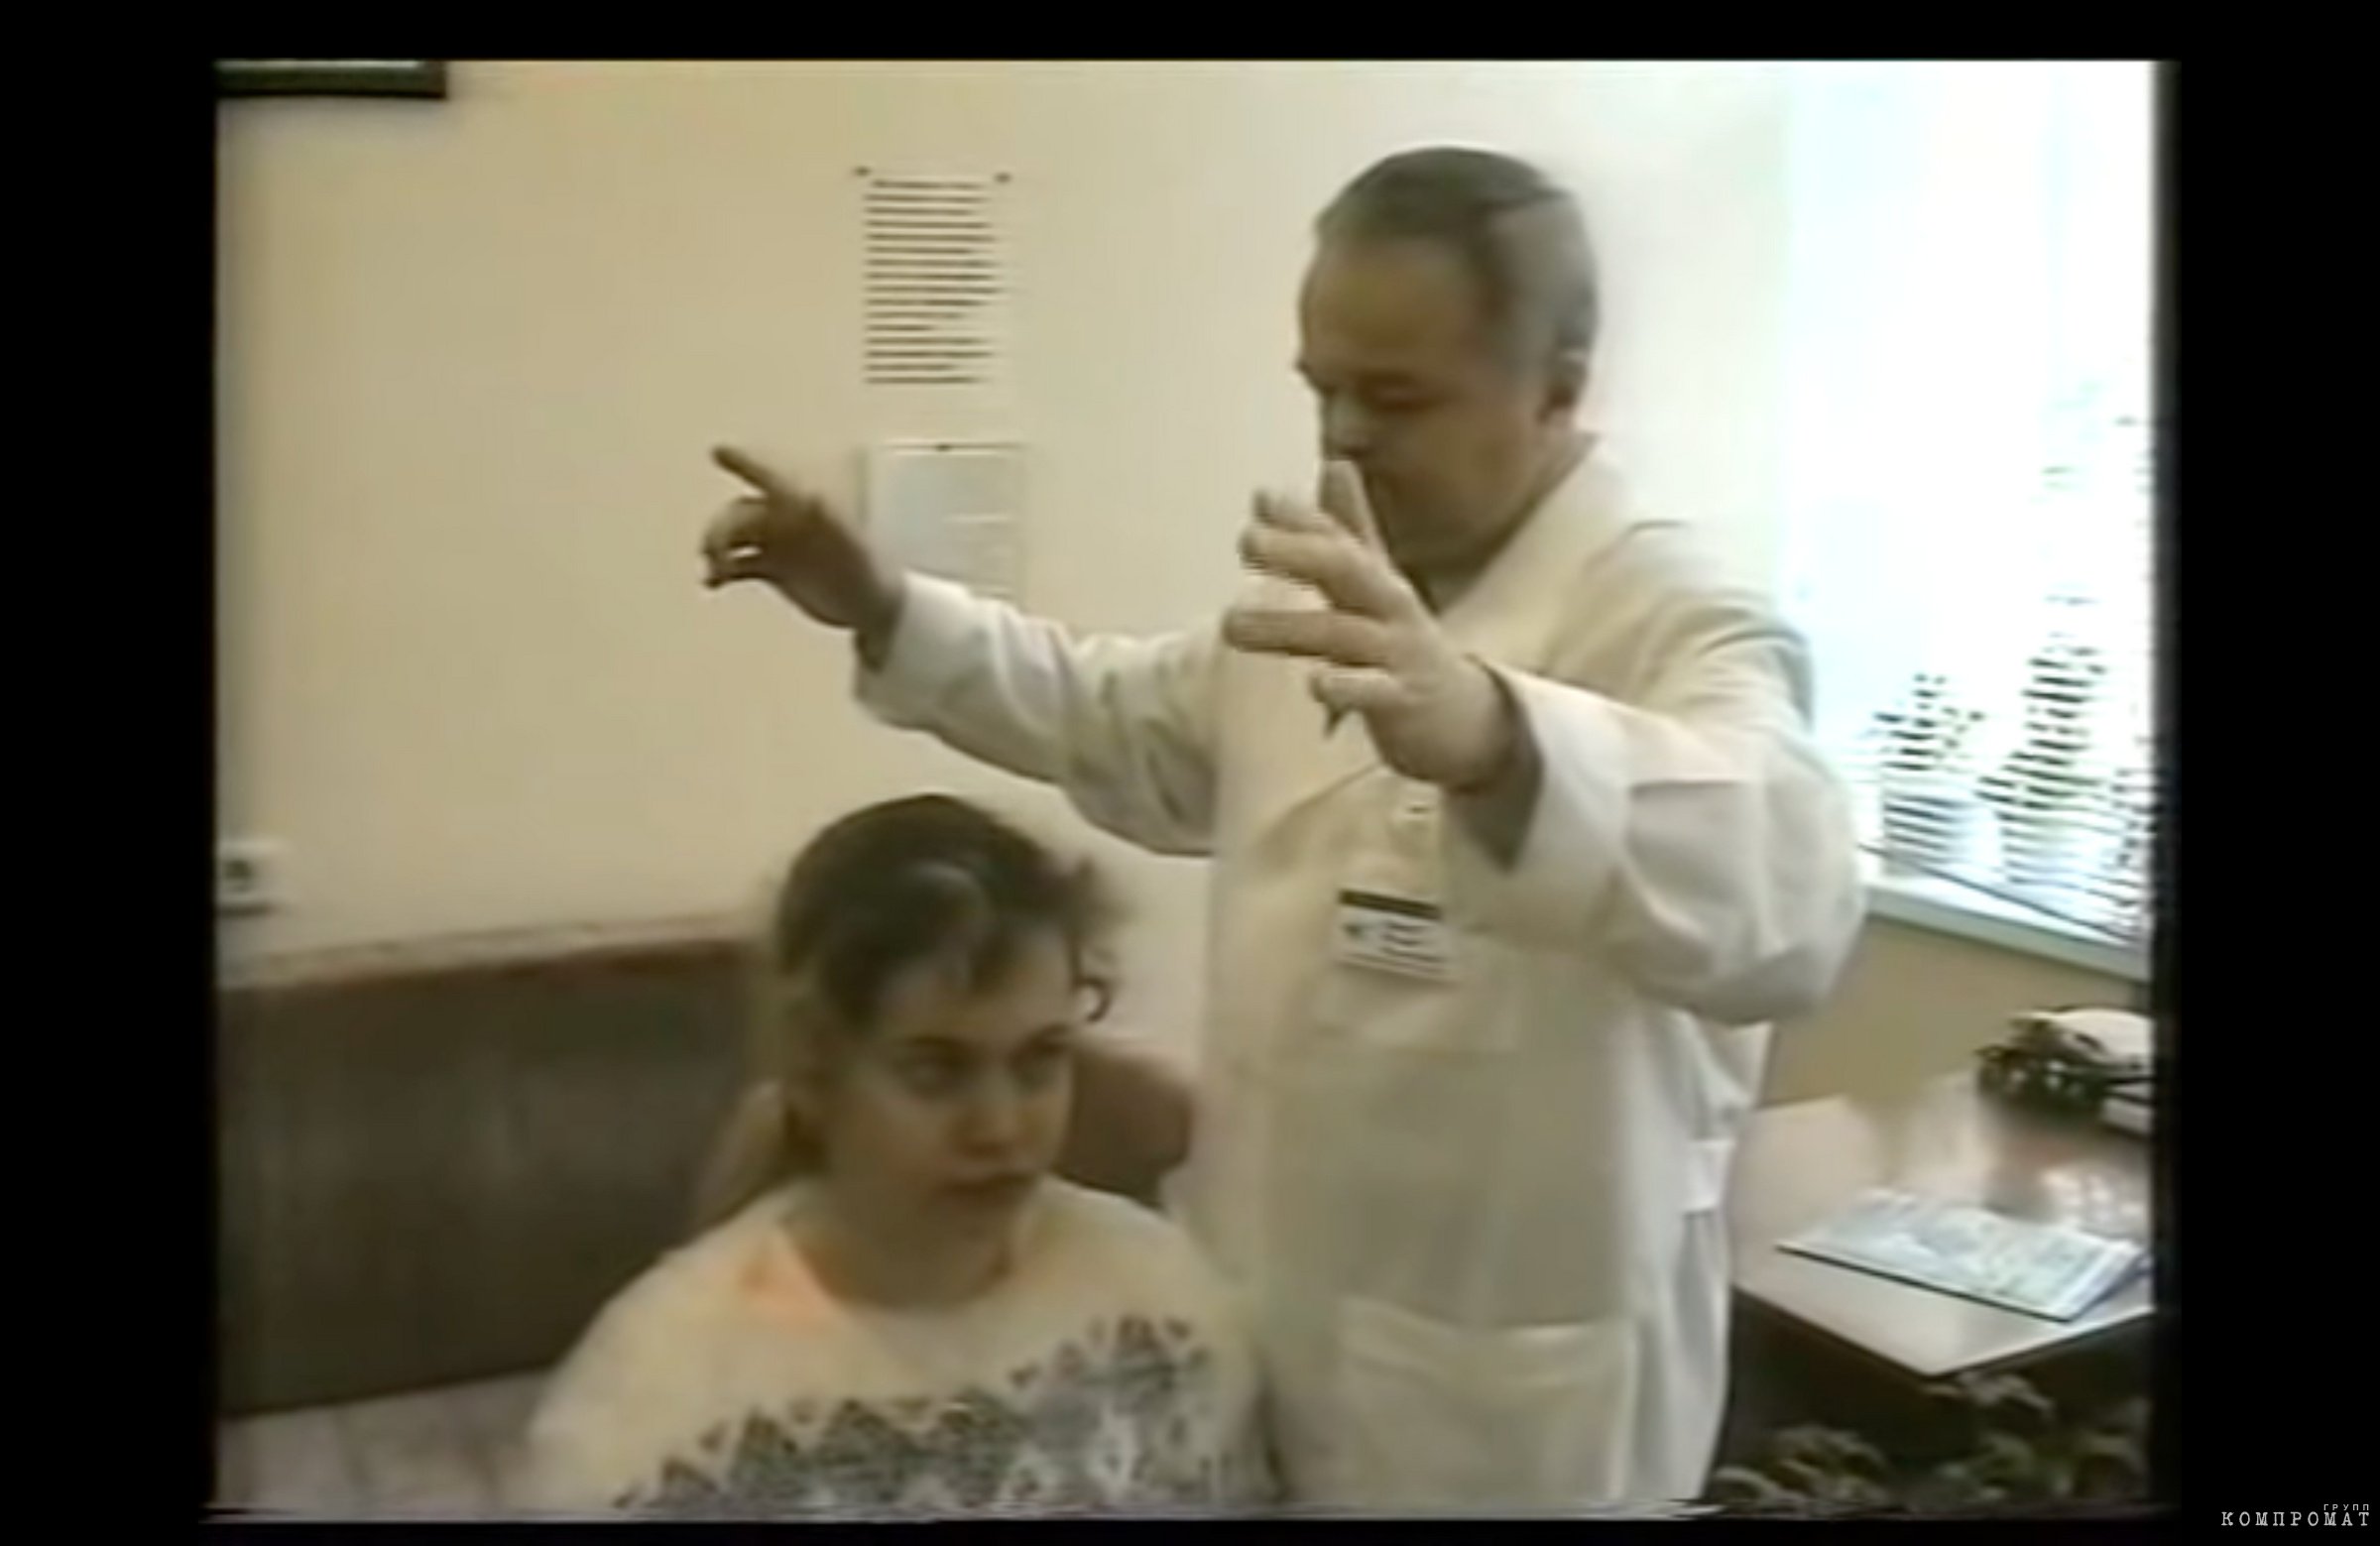 Valery Kustov while working at the "Family Doctor"